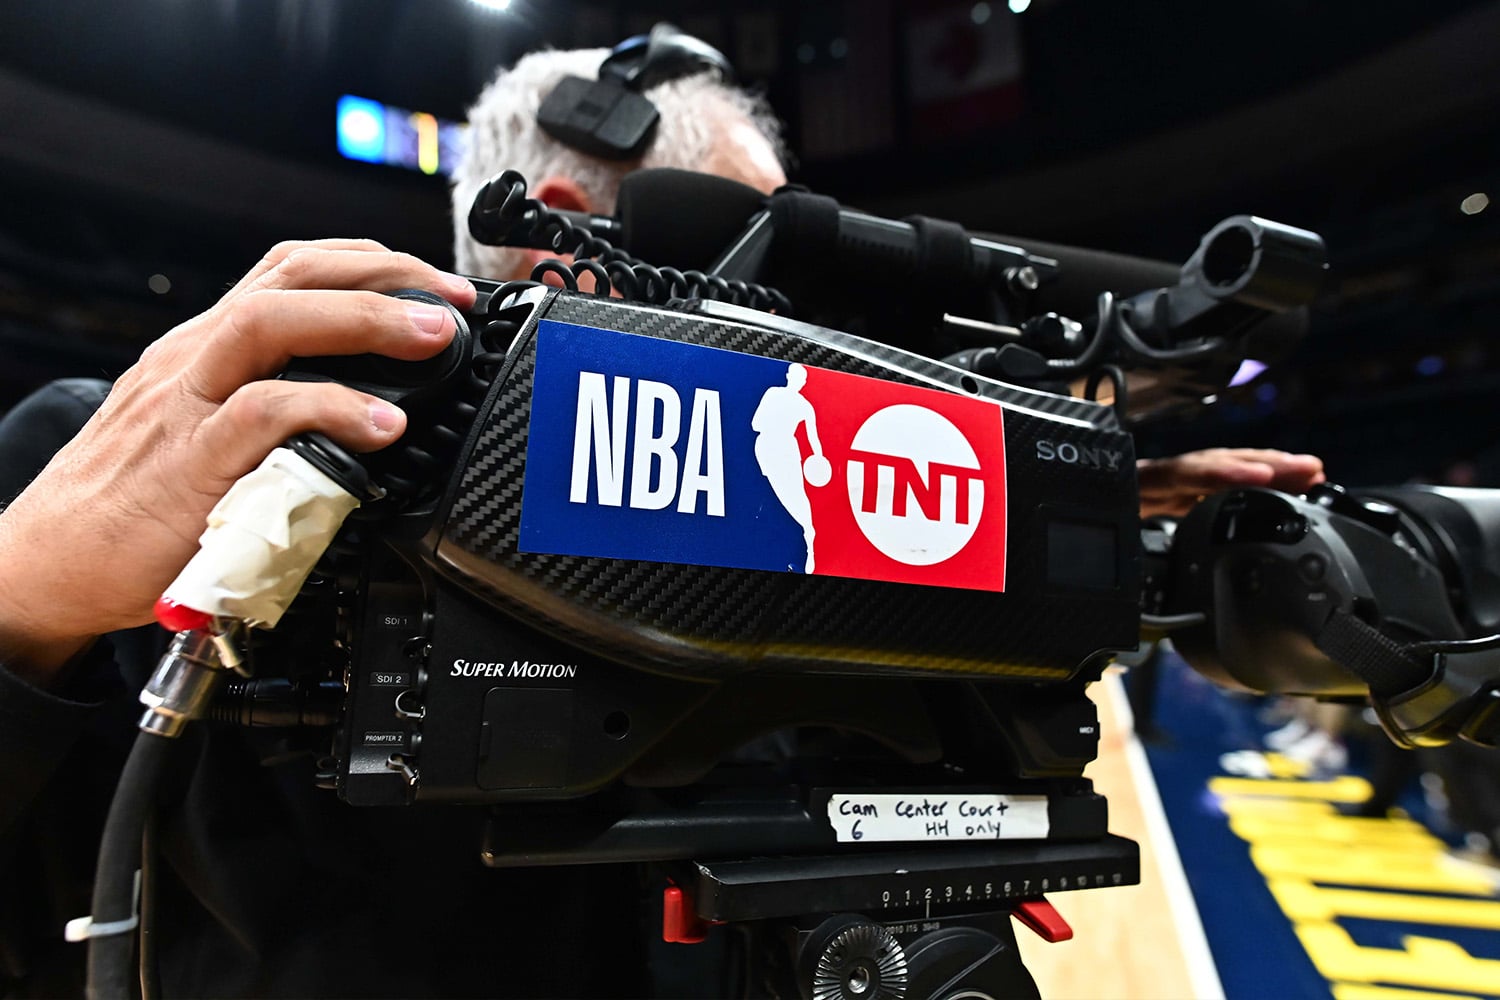 An NBA on TNT camera at a basketball game.